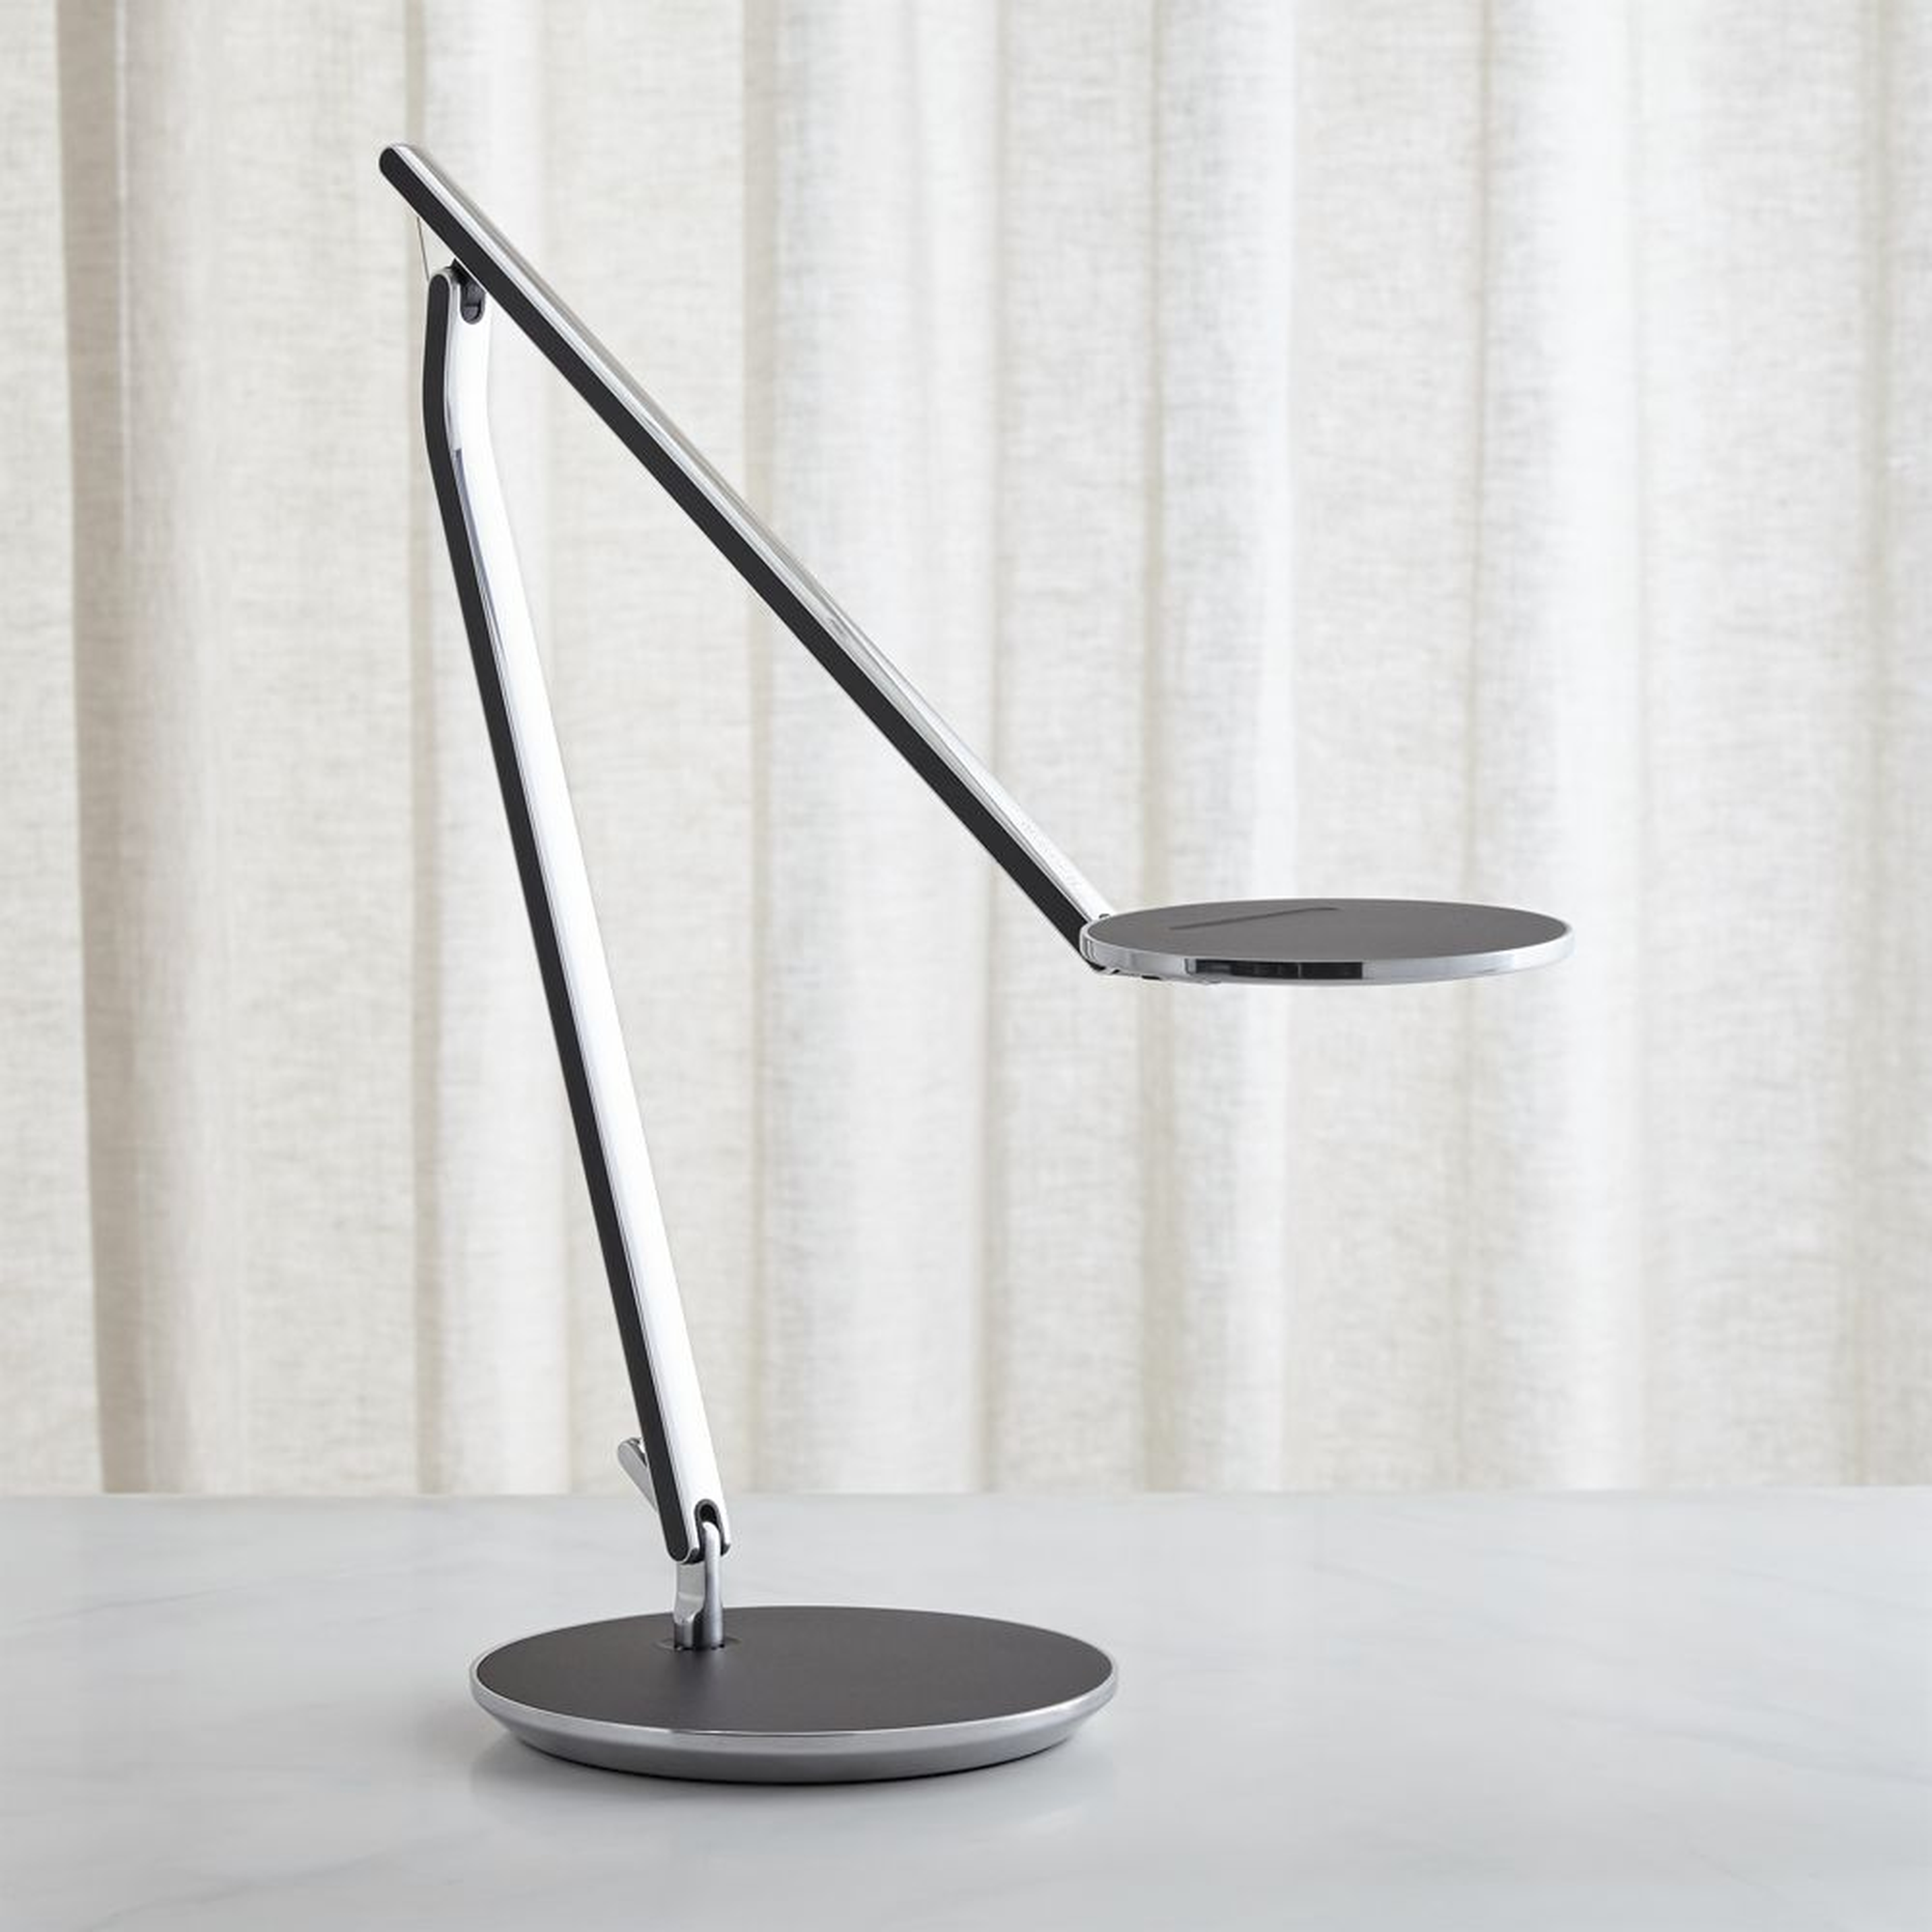 Humanscale ® Infinity Ash Black Desk Lamp - Crate and Barrel